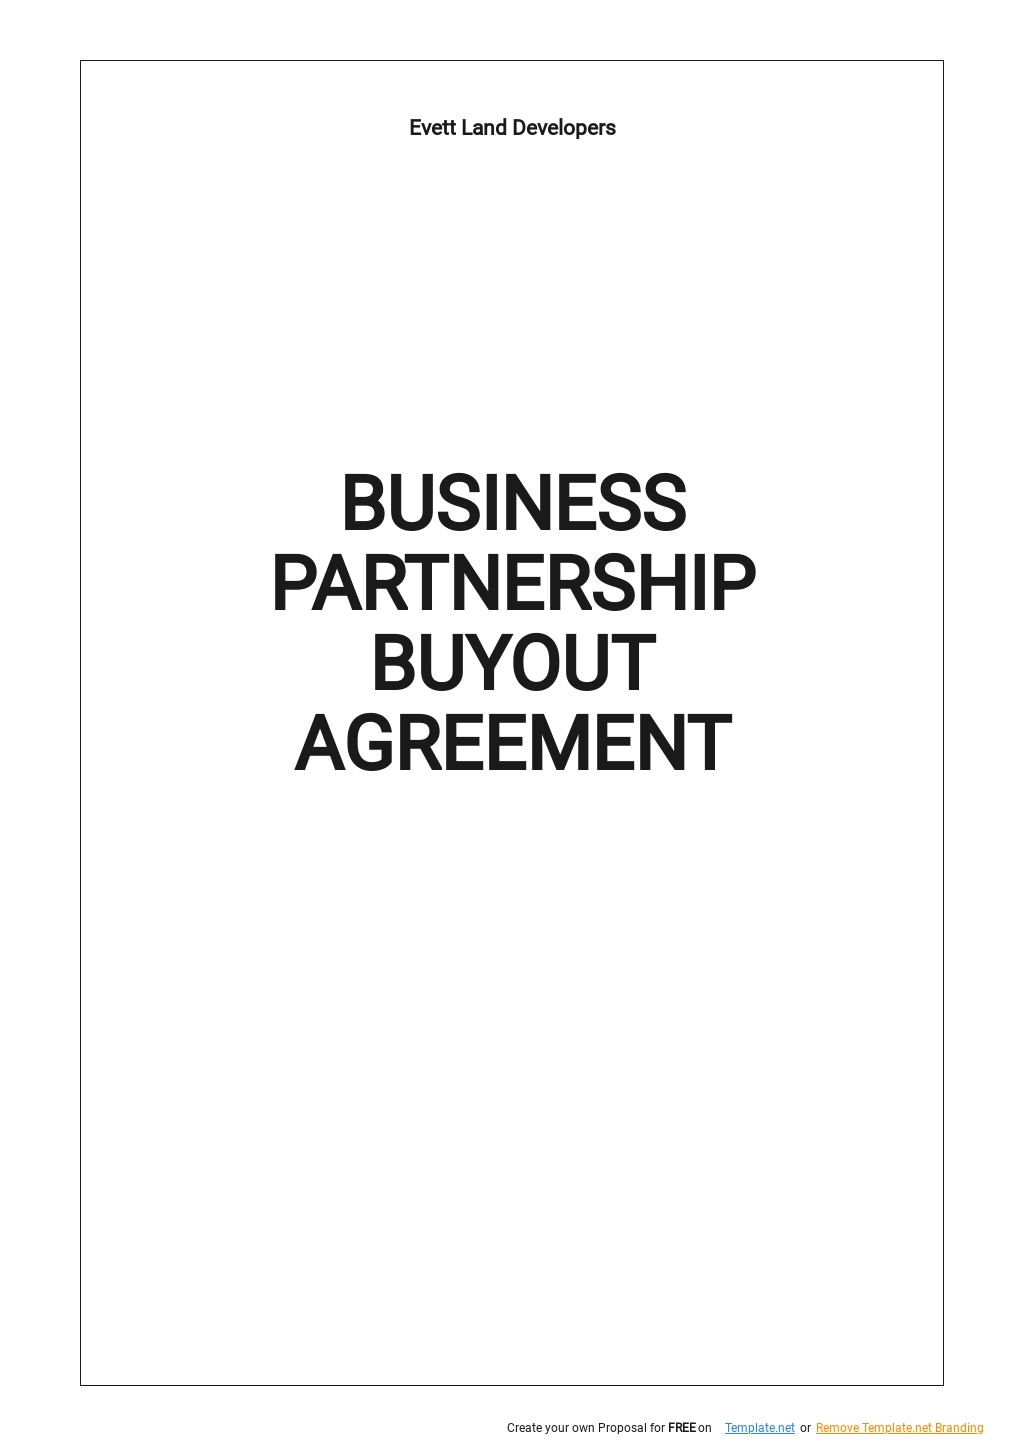 Business Partnership Buyout Agreement Template - Google Docs, Word Throughout buyout agreement template